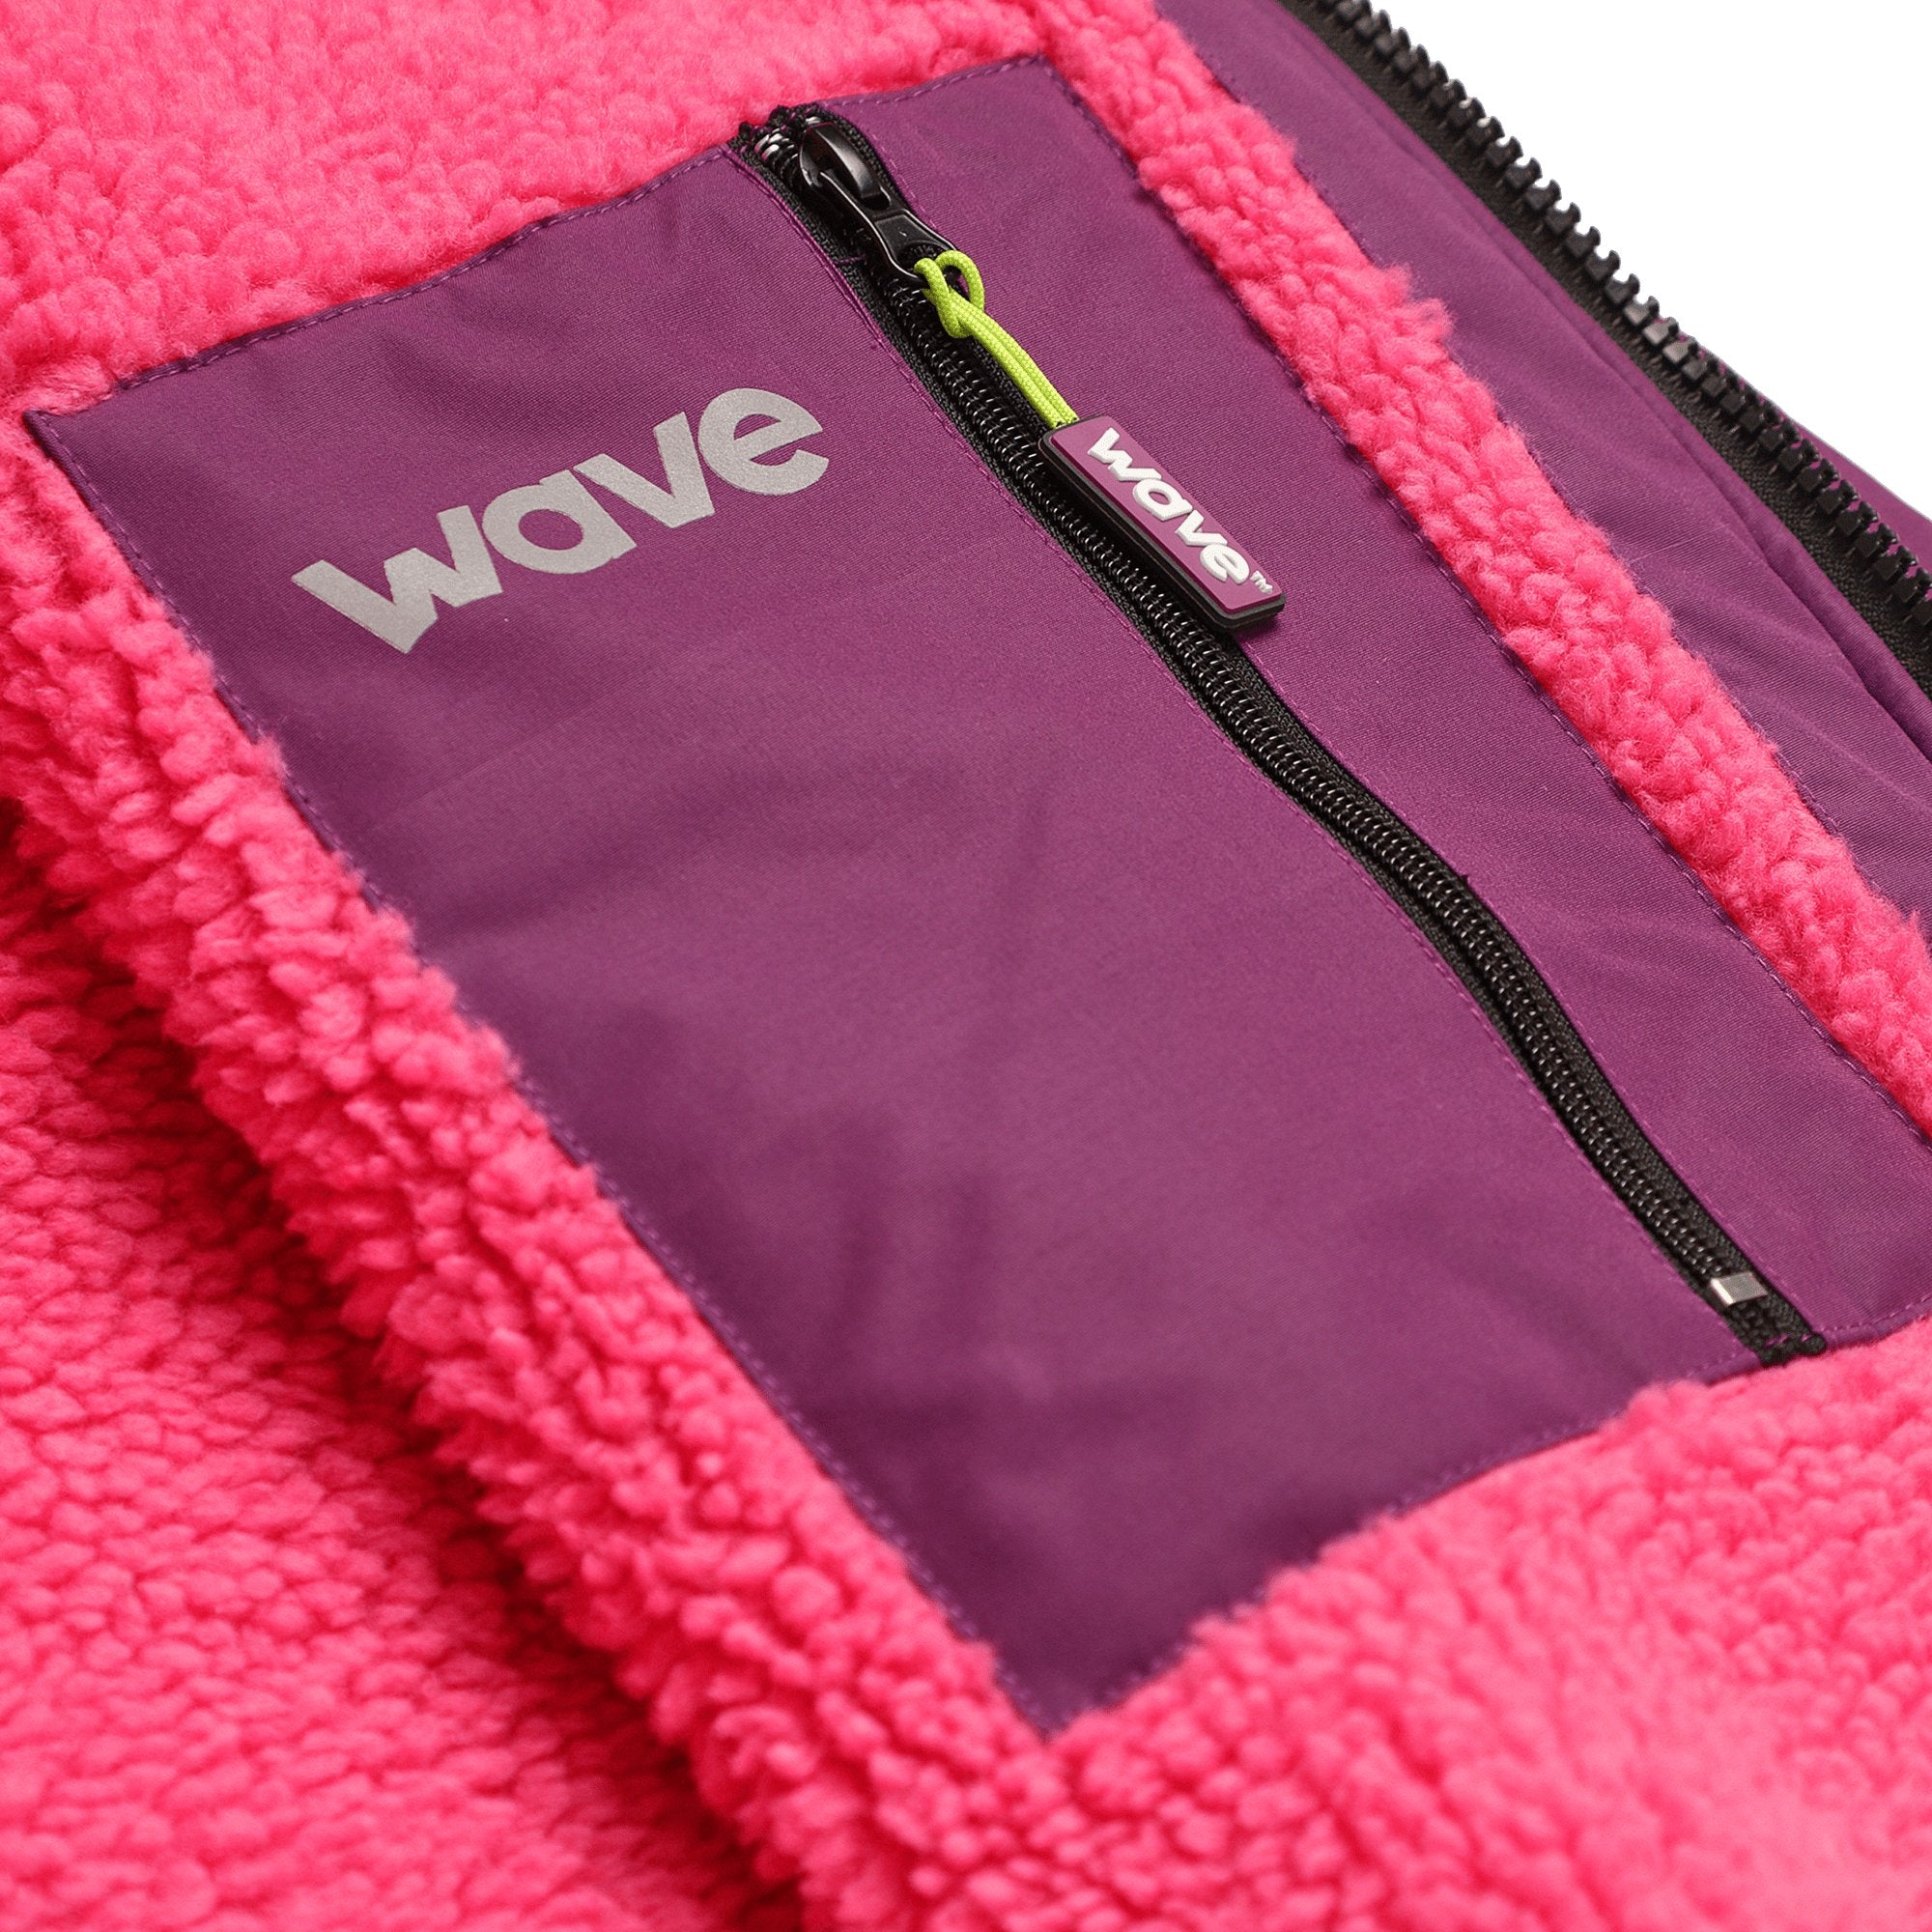 Fleece-Lined Changing Robe | Unisex | Purple - Wave Spas Inflatable, foam Hot Tubs